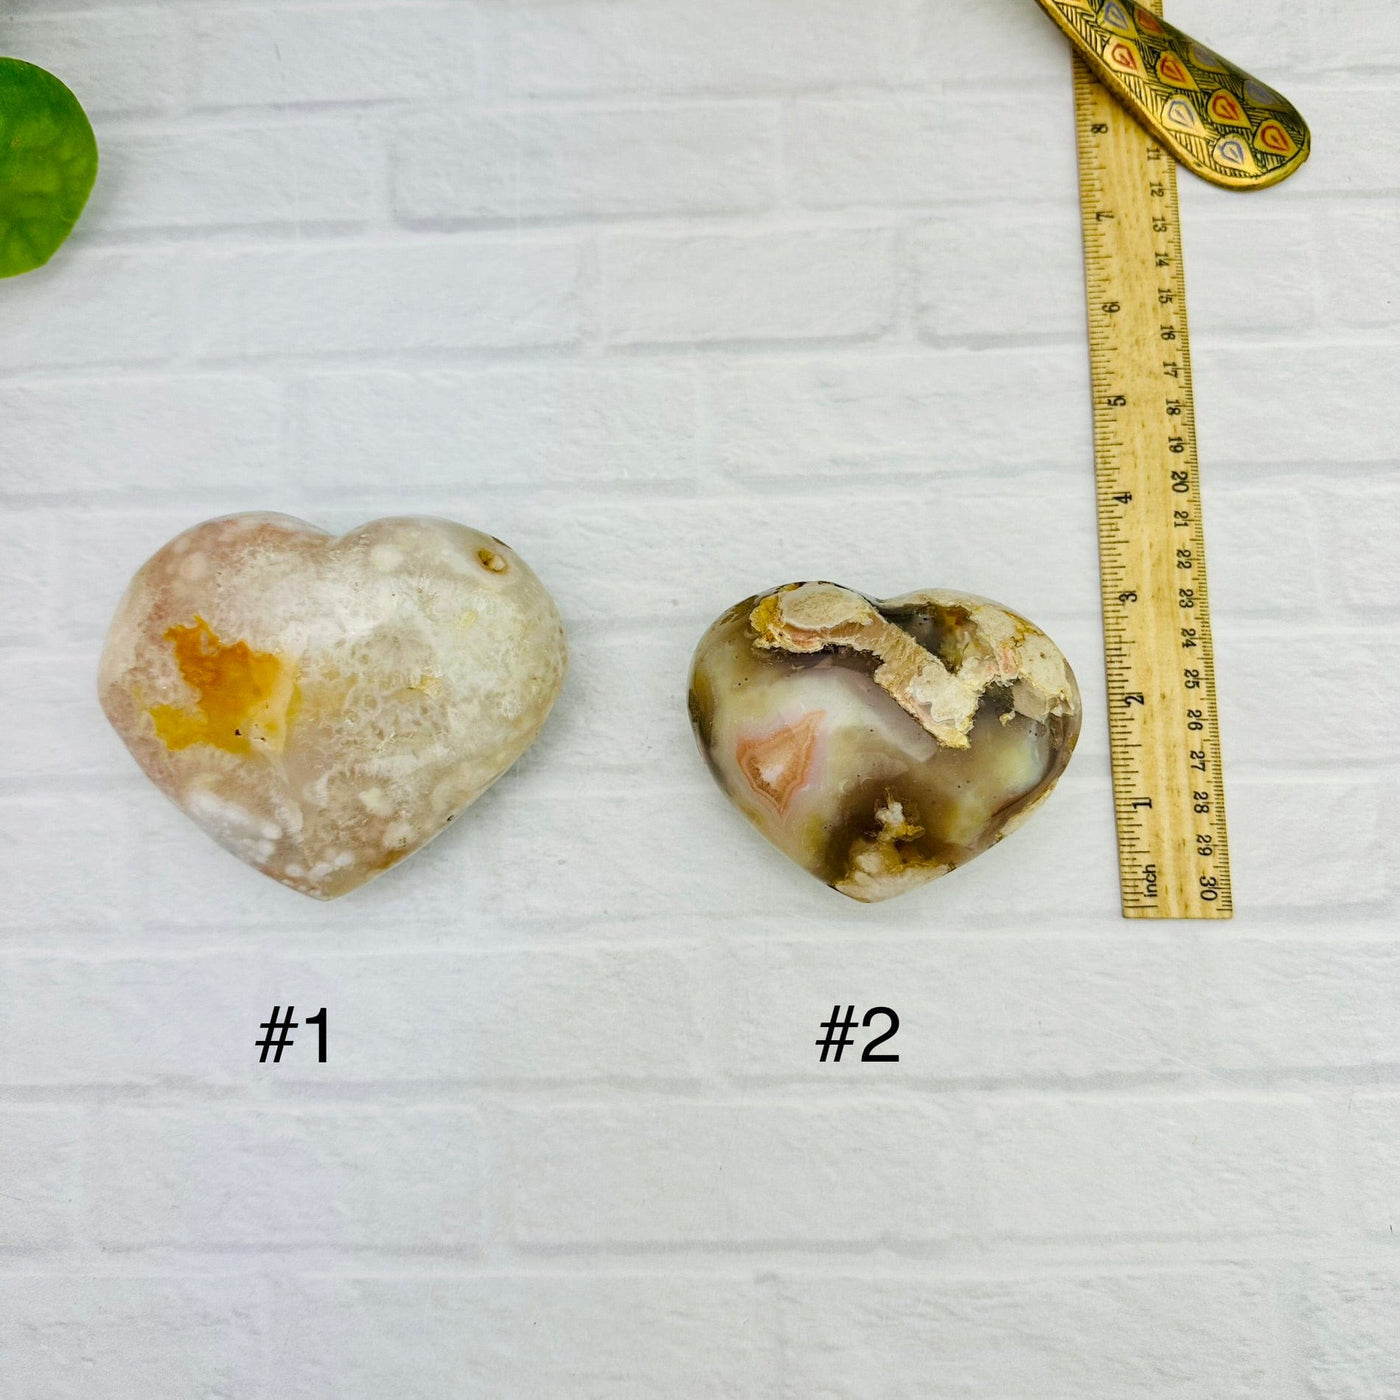 Polished Flower Agate Heart - You Choose - top view of choice number one and two with ruler for size refence 